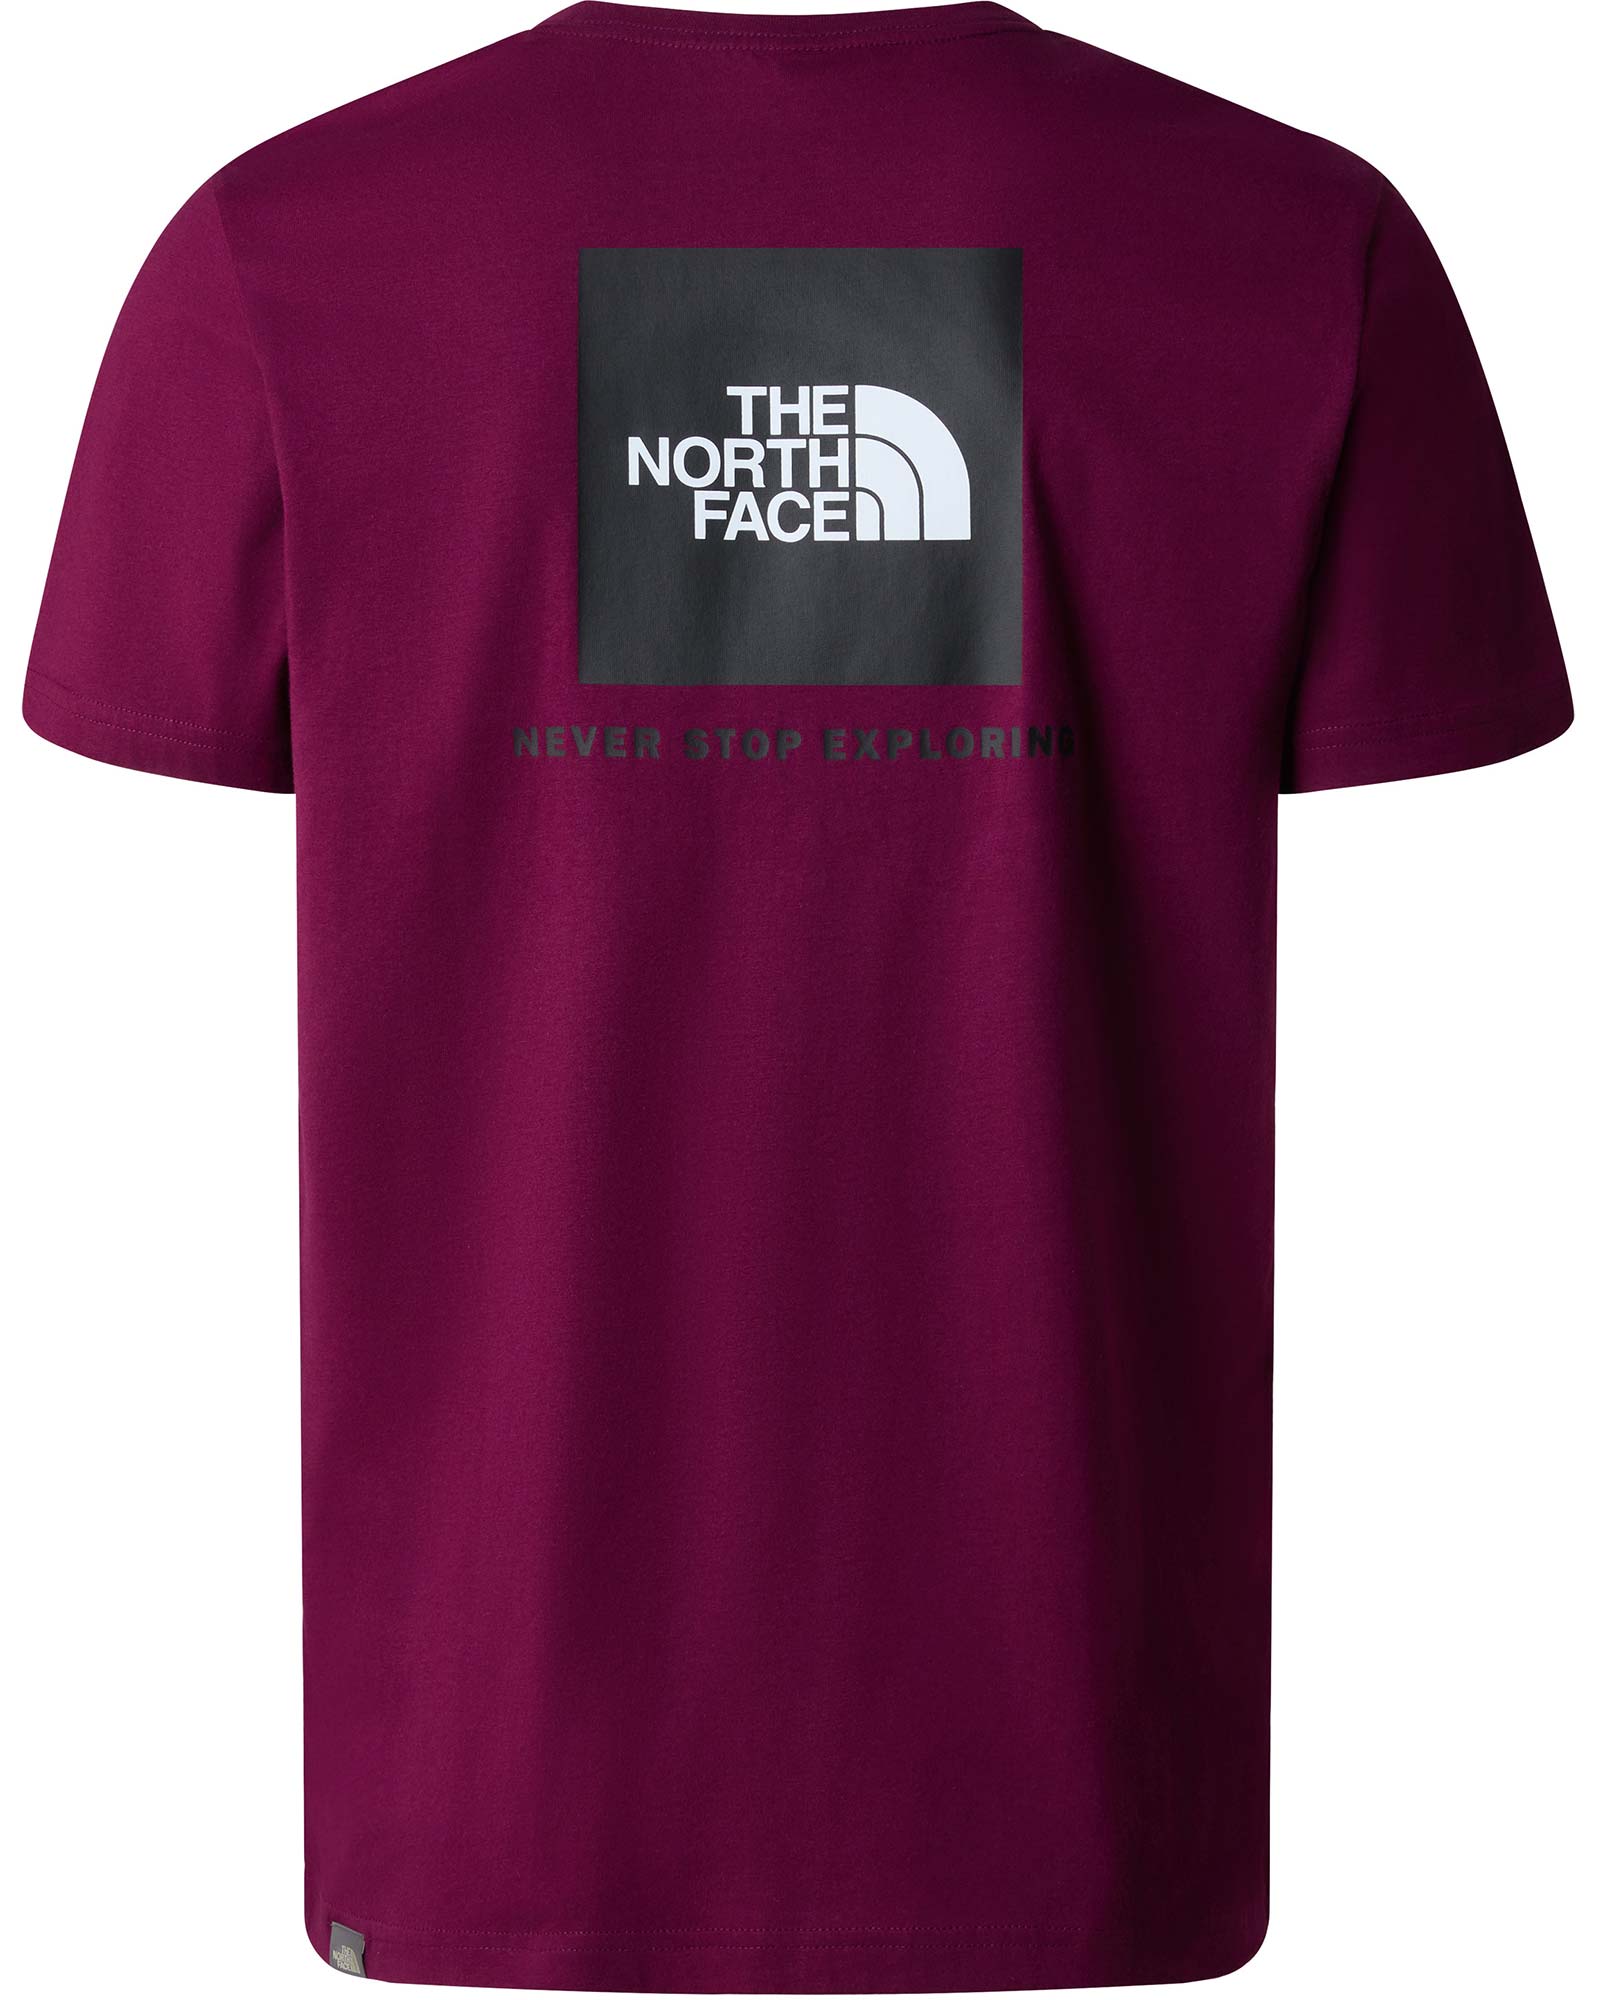 The North Face Red Box Men’s T Shirt - Boysenberry XS